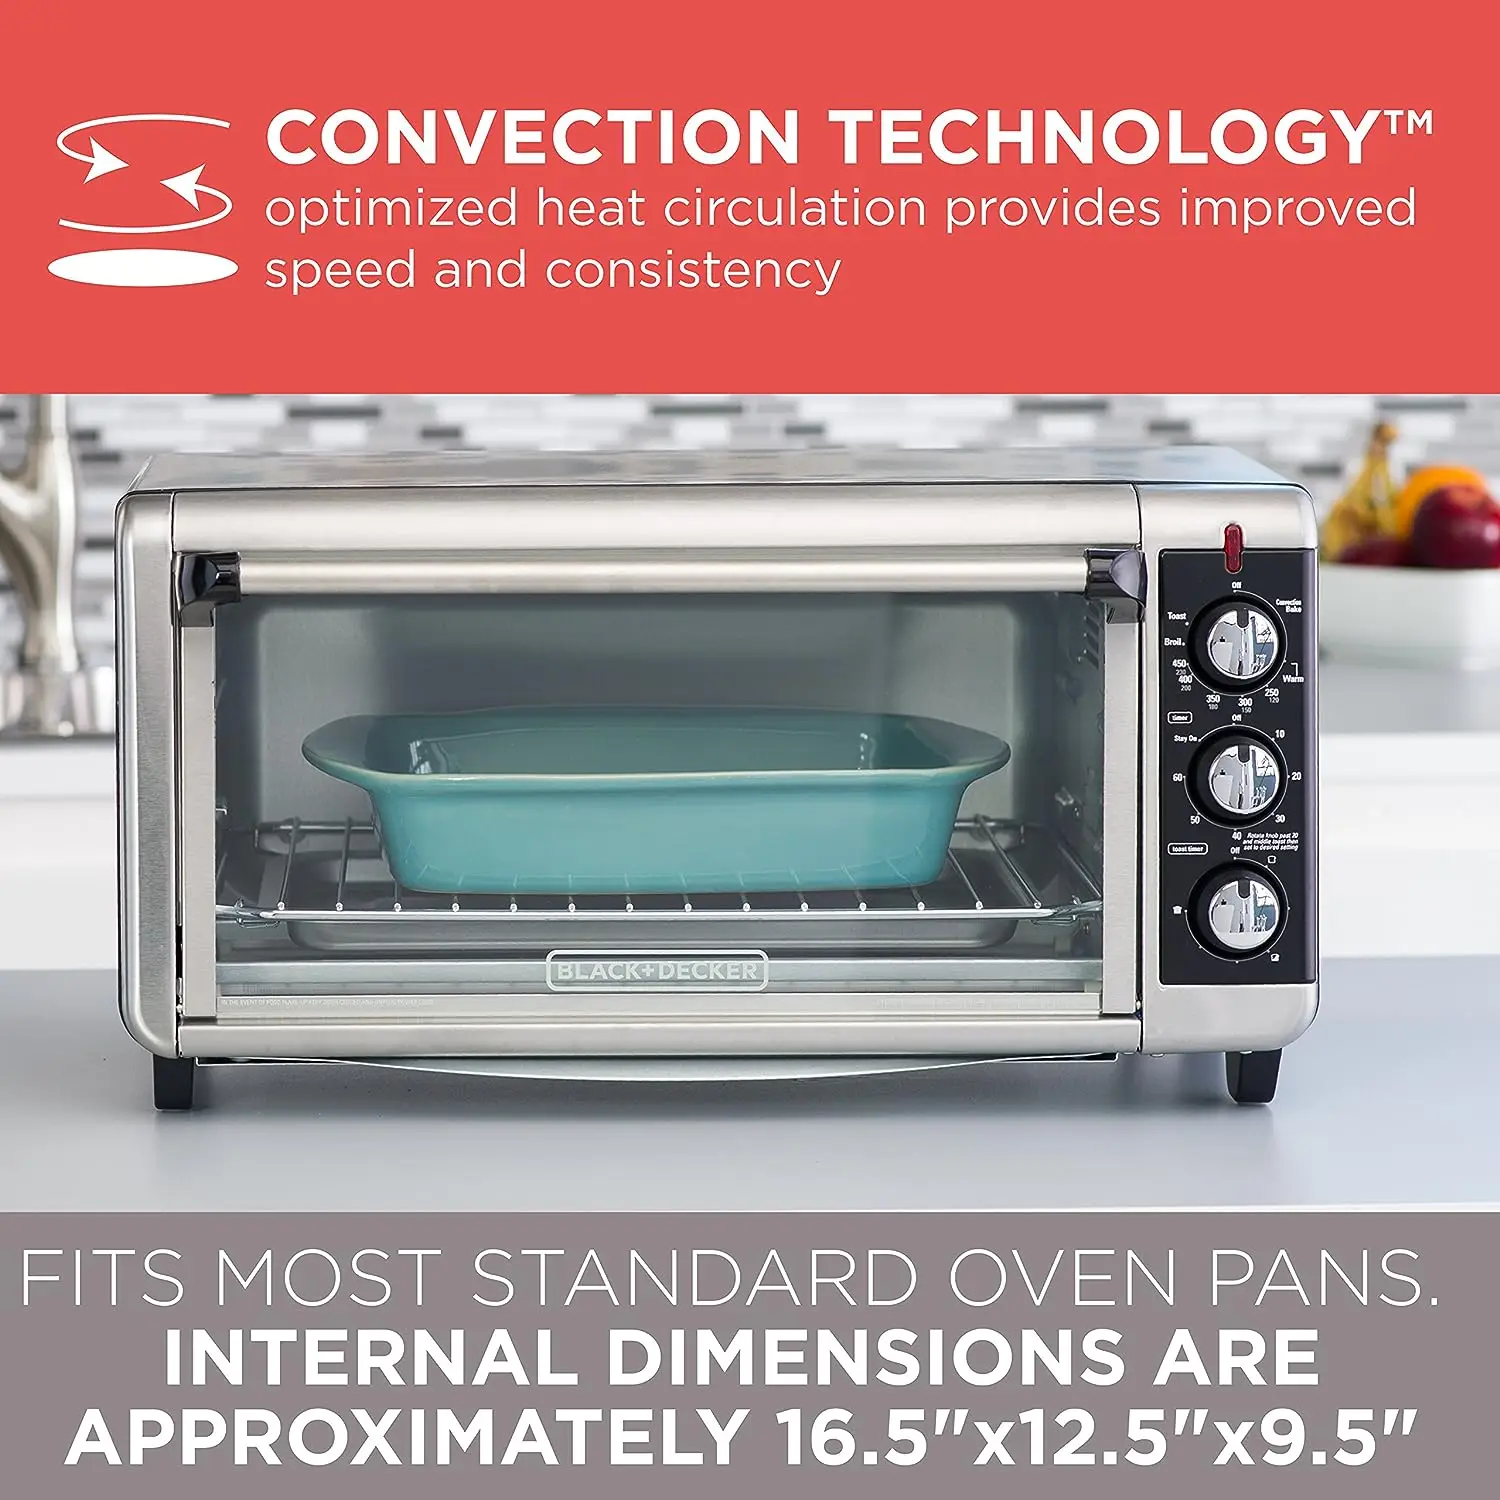 https://ae01.alicdn.com/kf/S007fe4d549af4cb88659cacf558ab8f6k/8-Slice-Extra-Wide-Convection-Countertop-Toaster-Oven-Includes-Bake-Pan-Broil-Toasting-Stainless-Steel-Black.jpg